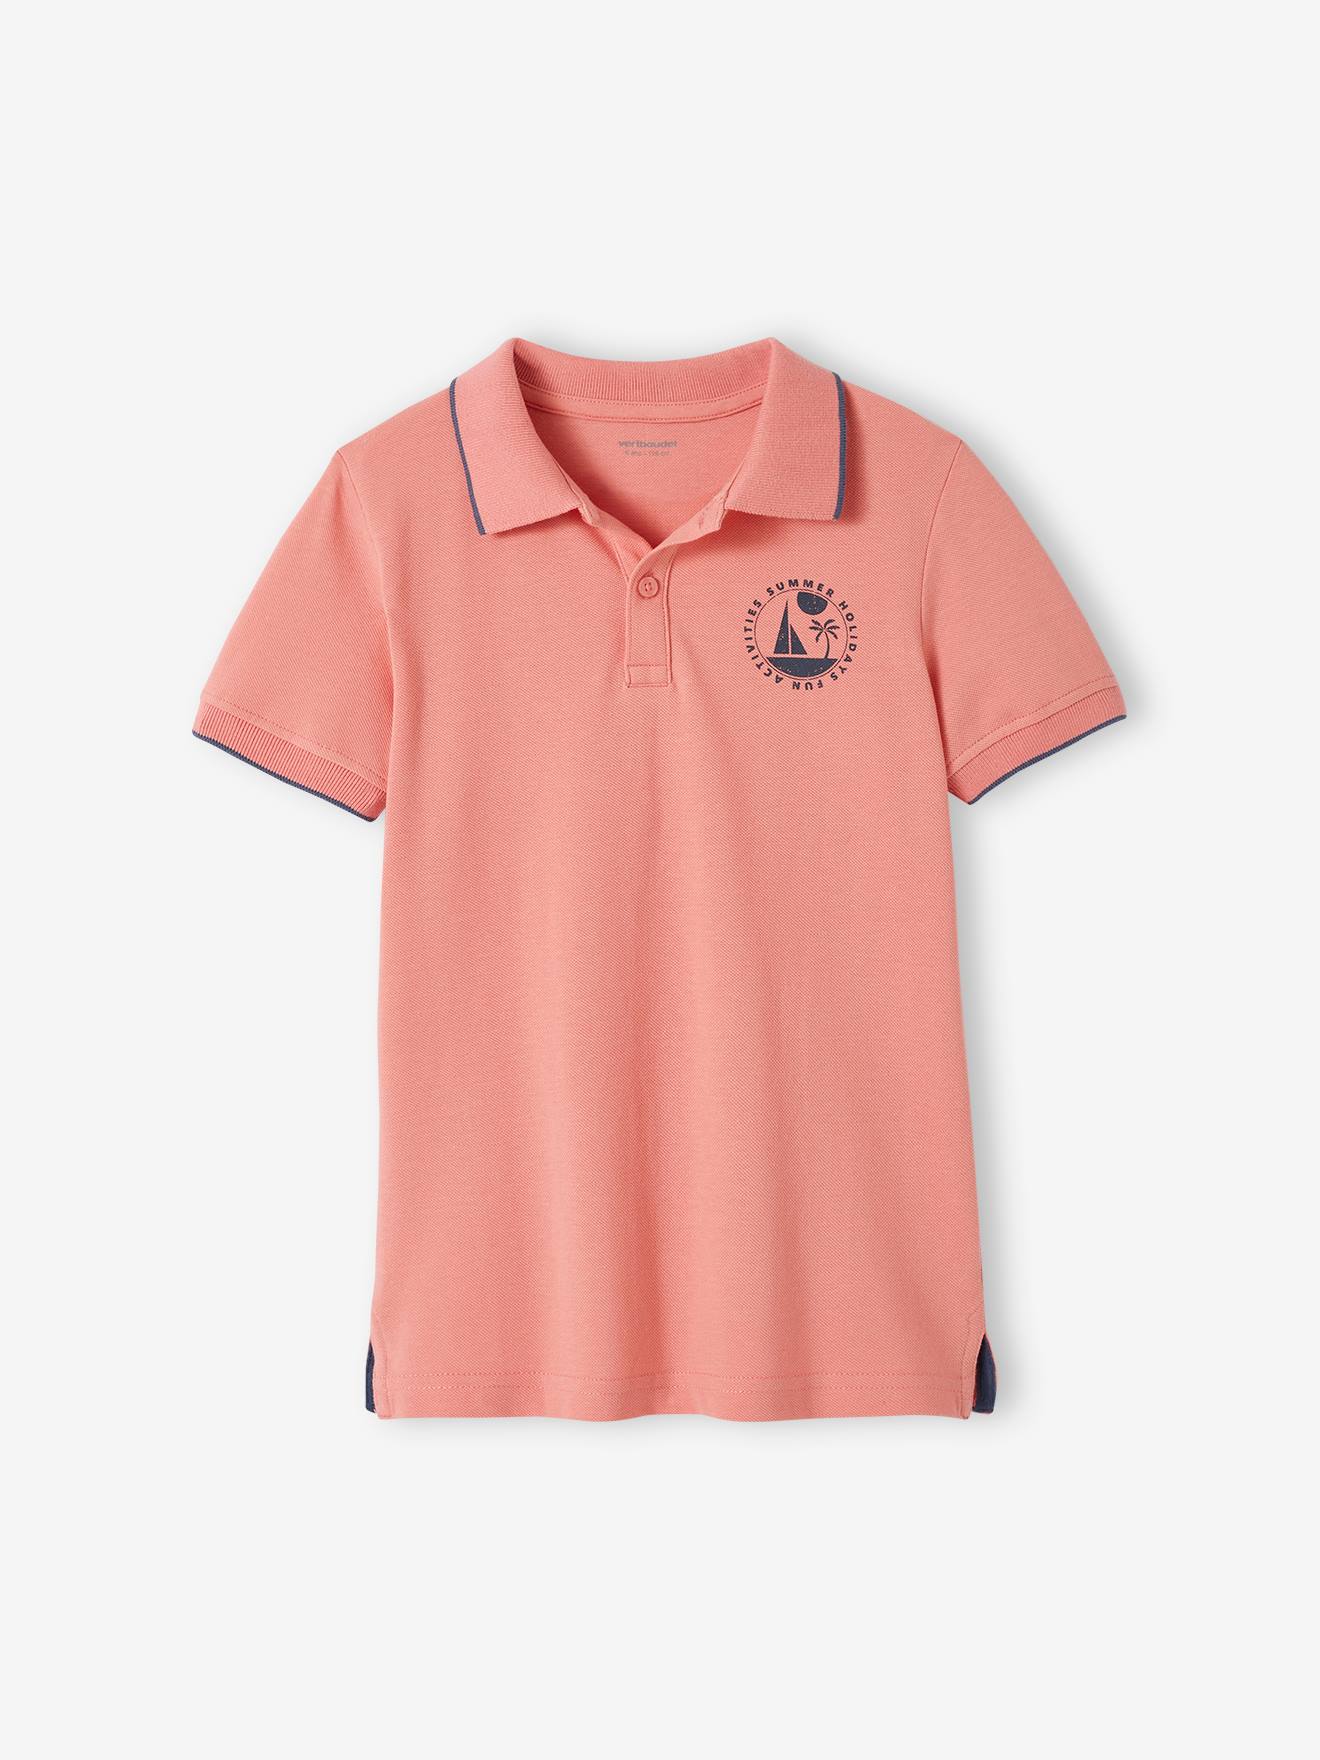 Polo Shirt in Pique Knit with Motif on the Breast for Boys old rose